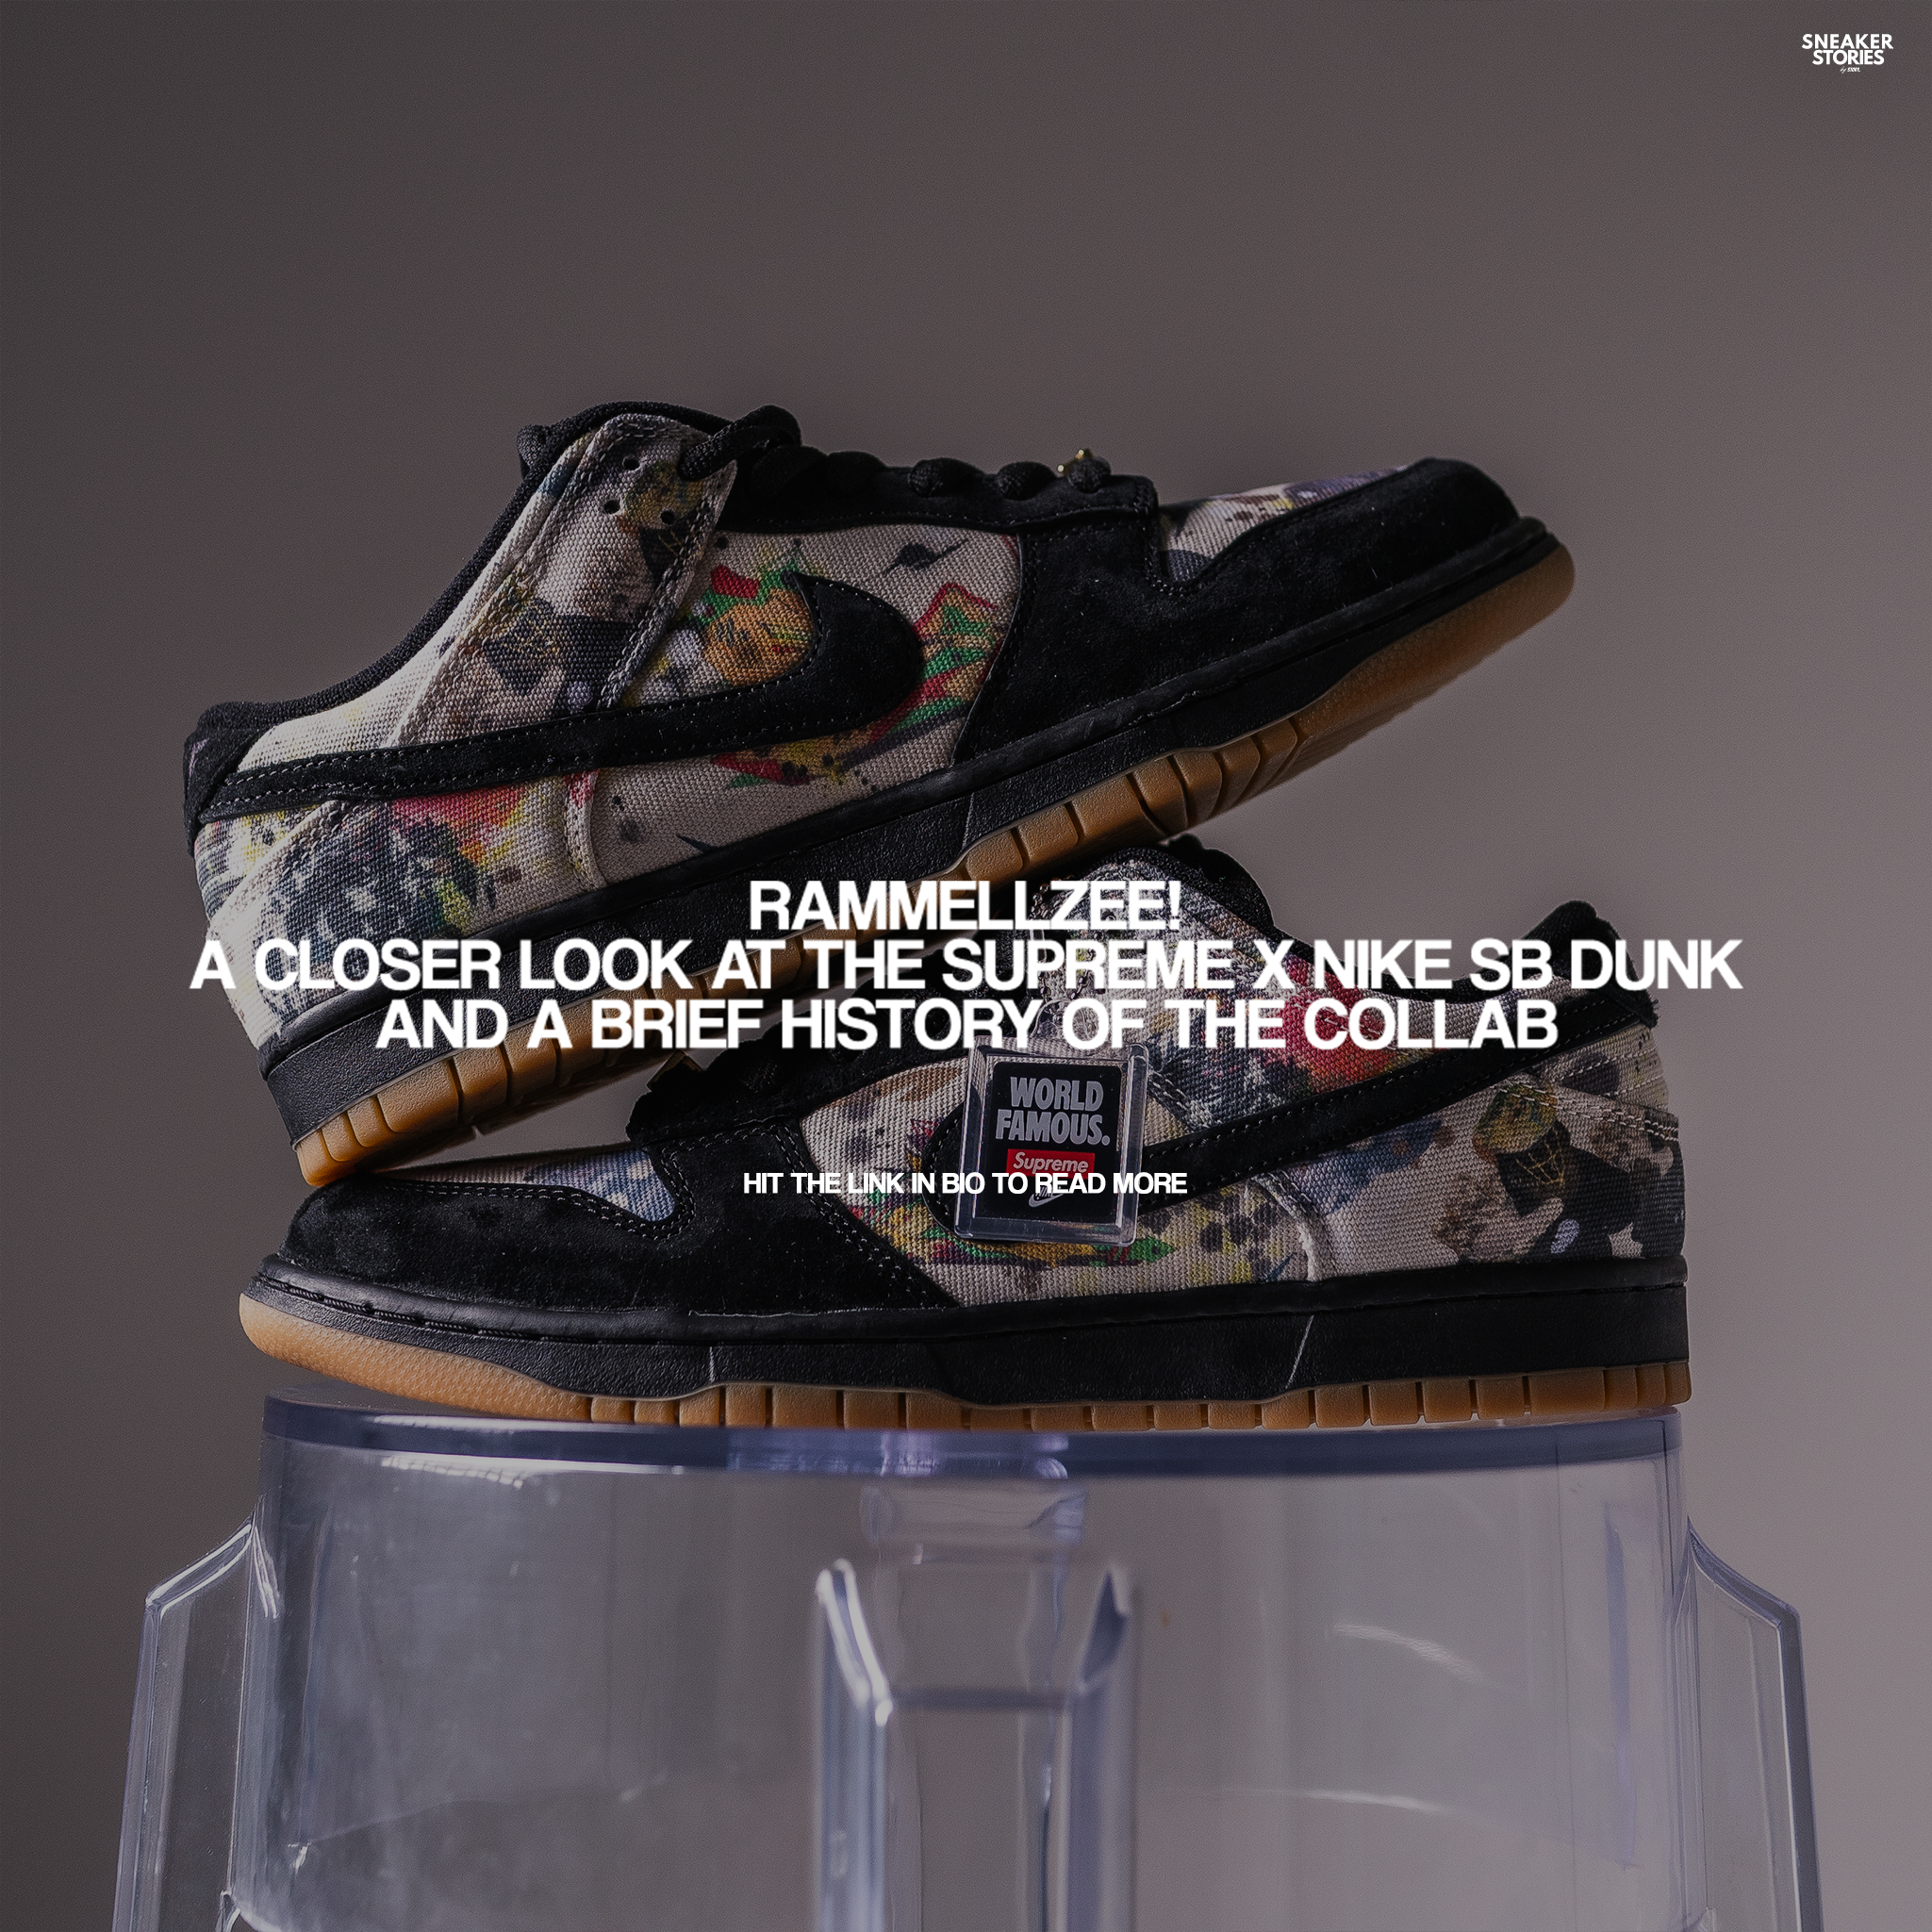 Rammellzee! A closer look at the Supreme x Nike SB dunk and a brief hi –  Story Cape Town